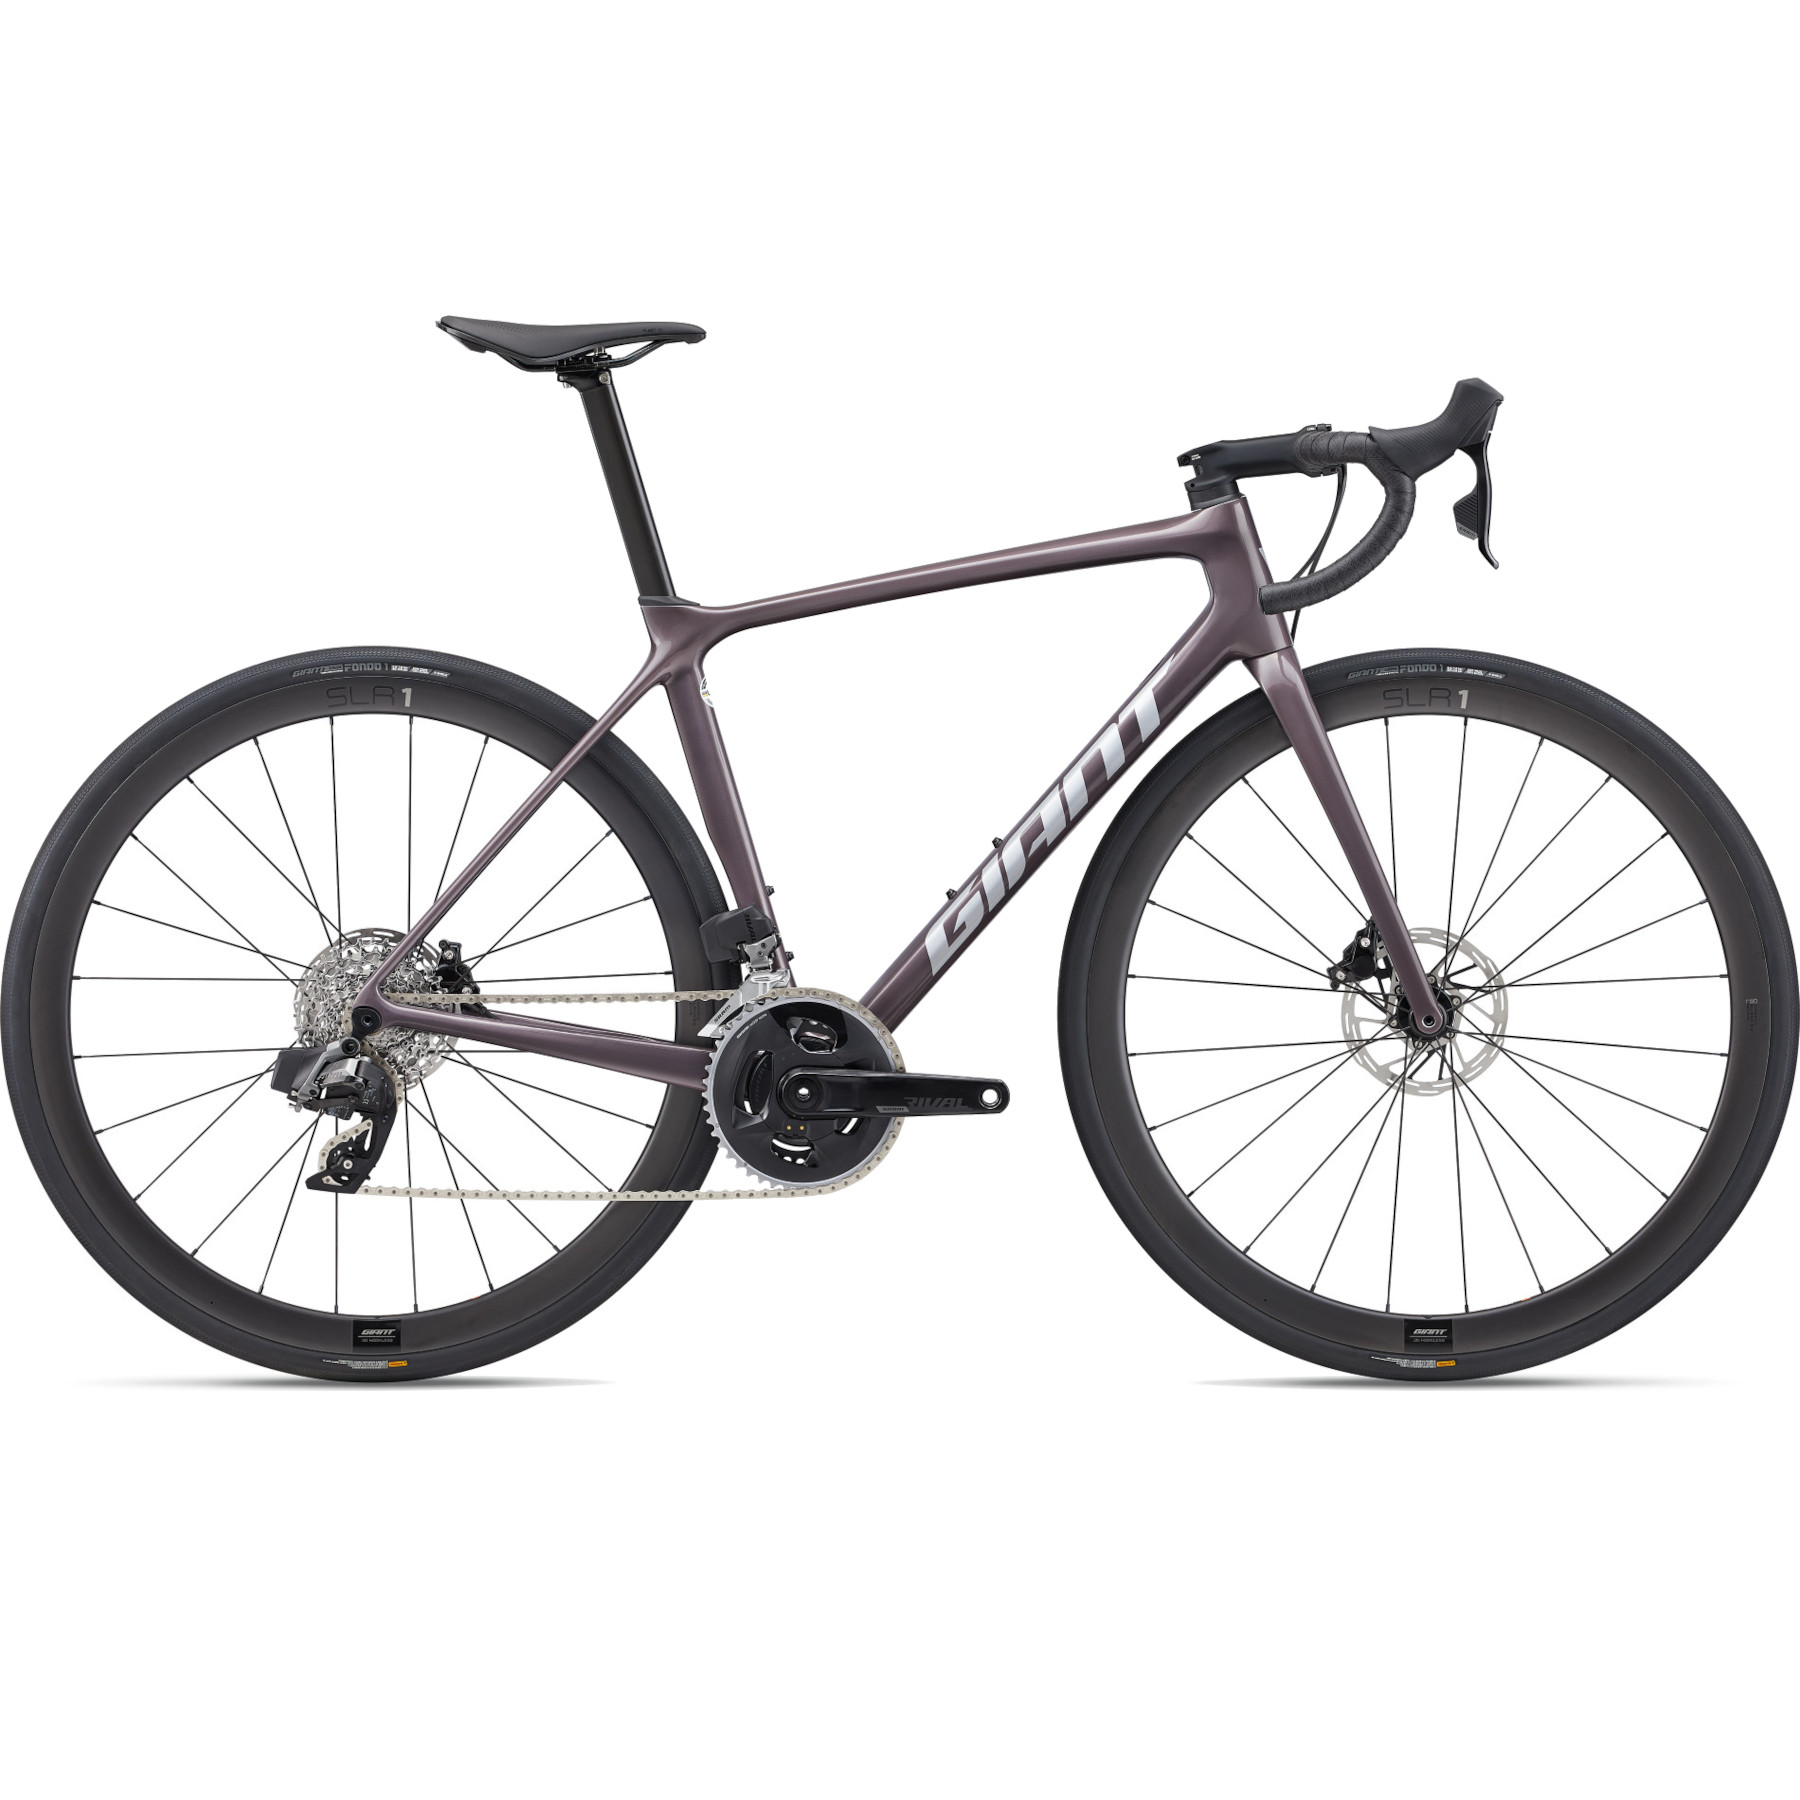 Picture of Giant TCR ADVANCED PRO 1 AR - Carbon Road Bike - 2023 - Charcoal Plum